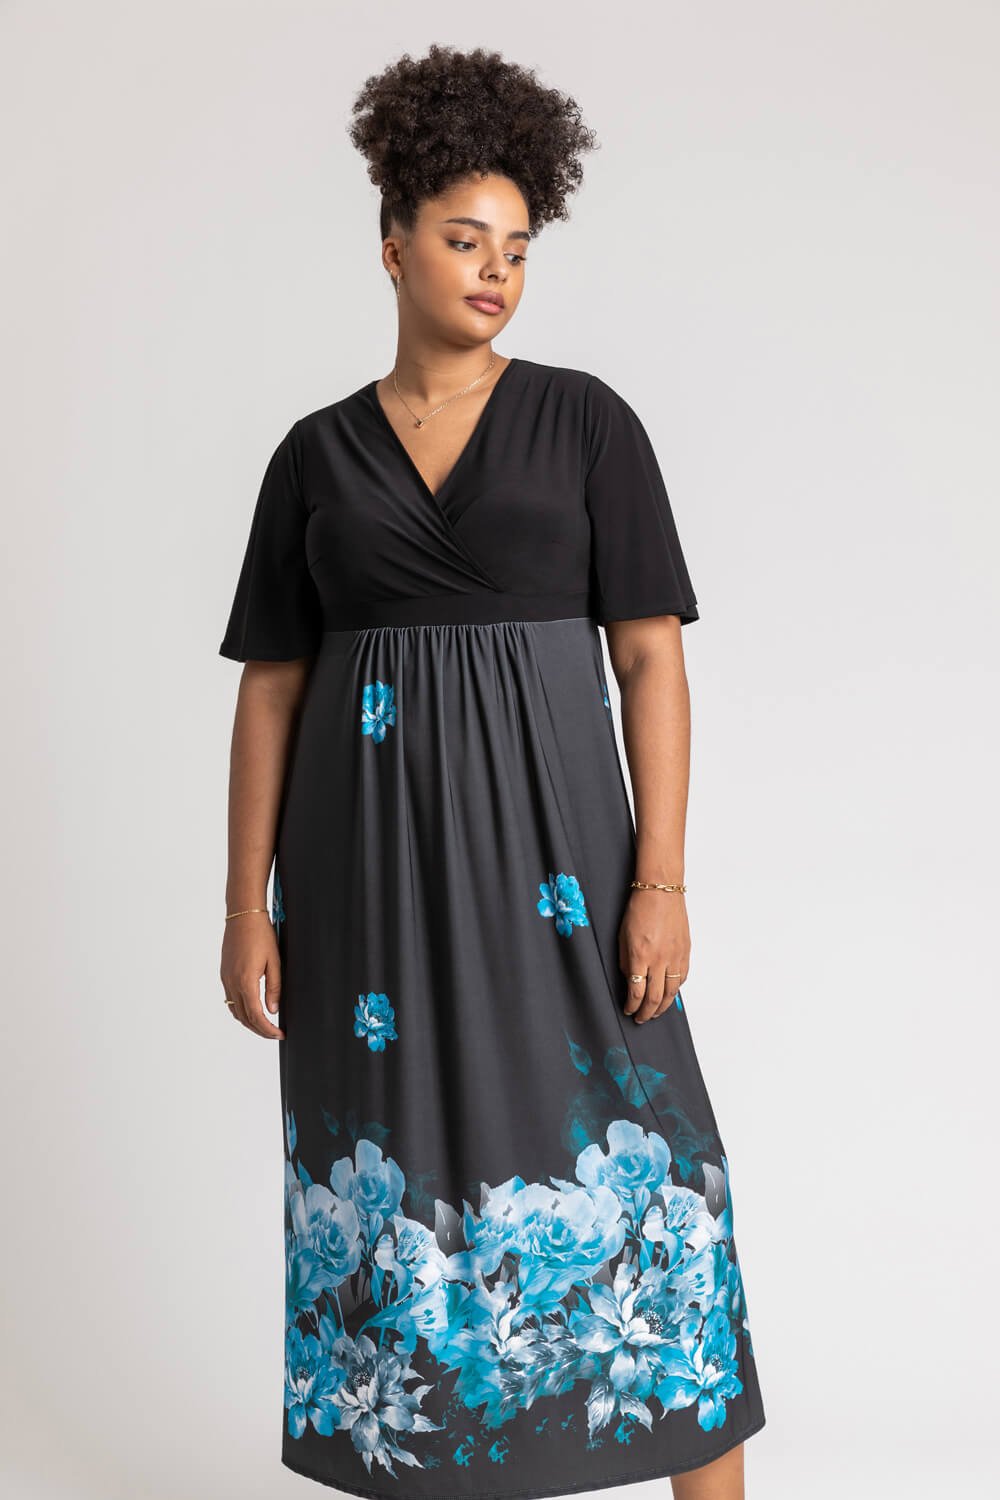 Sonia Tiered Maxi by Line + Dot for $57